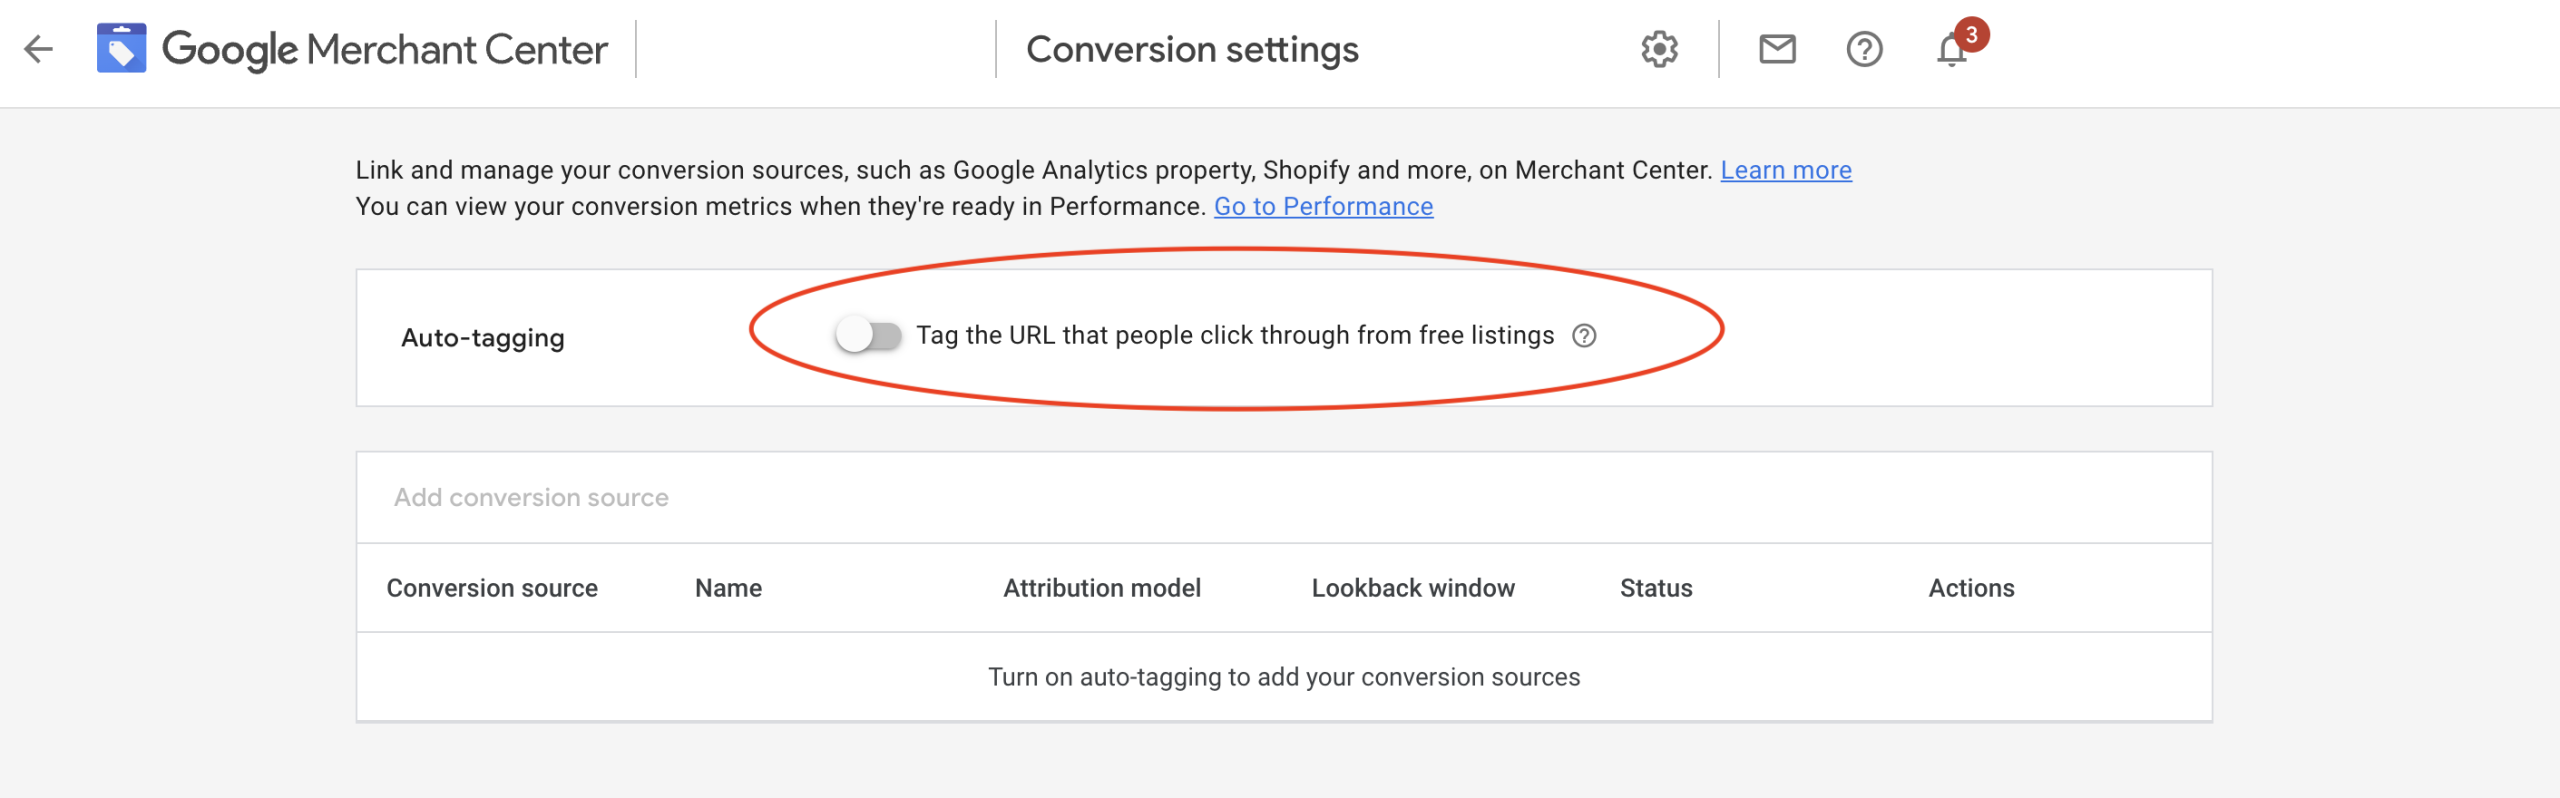 Screen shot of Google Merchant Center conversion settings - where to turn on auto-tagging